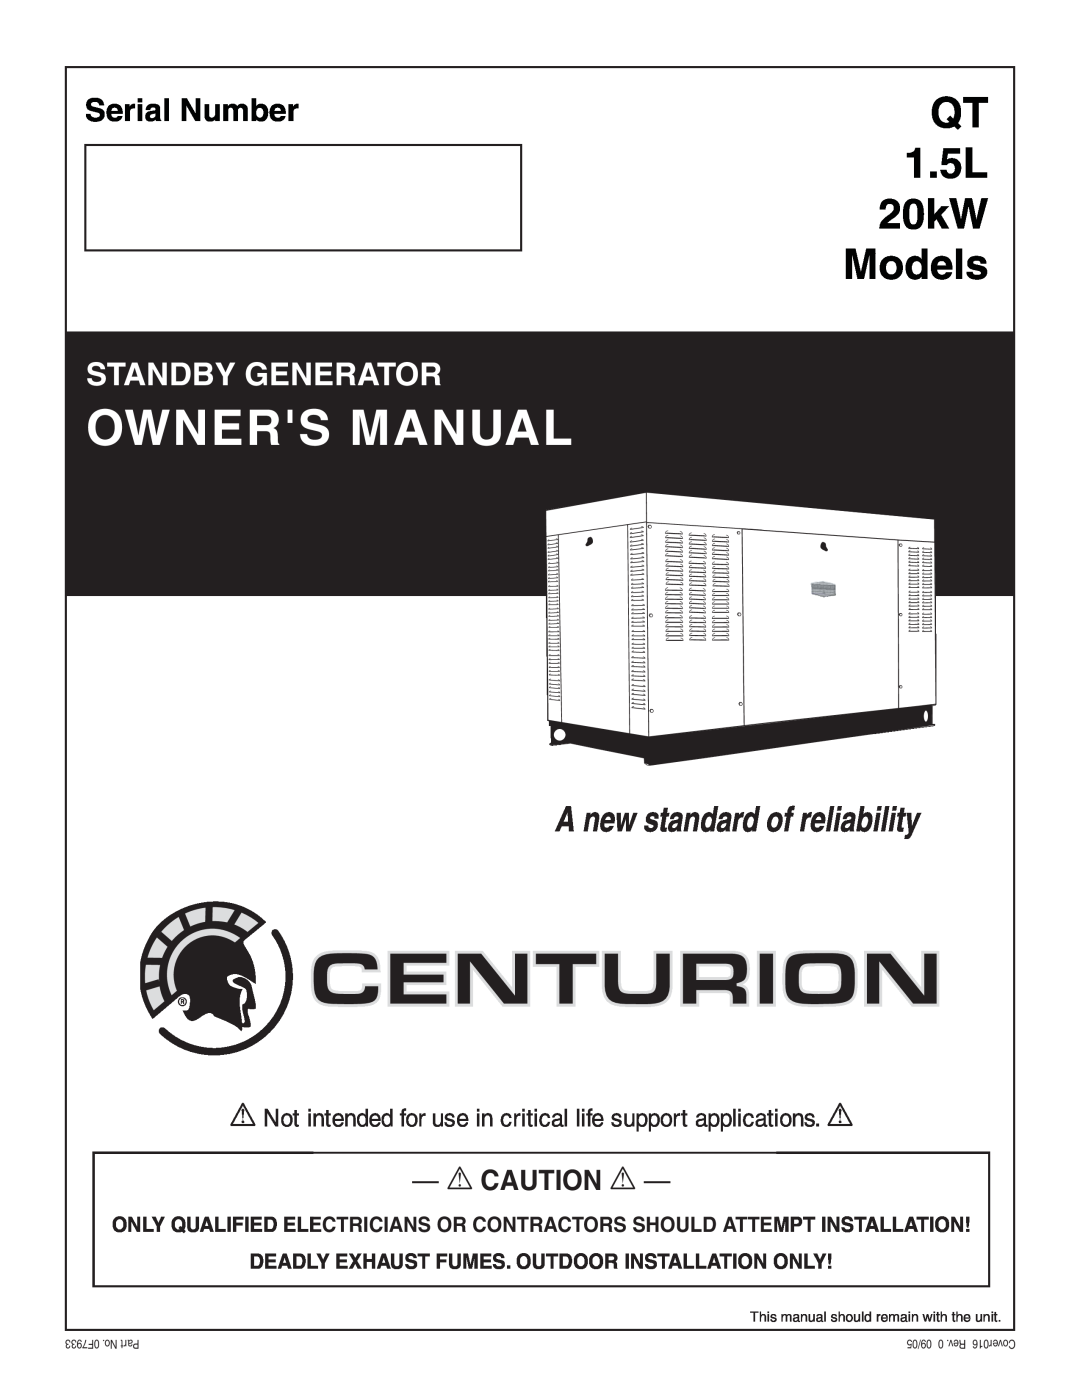 Generac owner manual Deadly Exhaust Fumes. Outdoor Installation Only, Centurion, QT 1.5L 20kW Models, Serial Number 